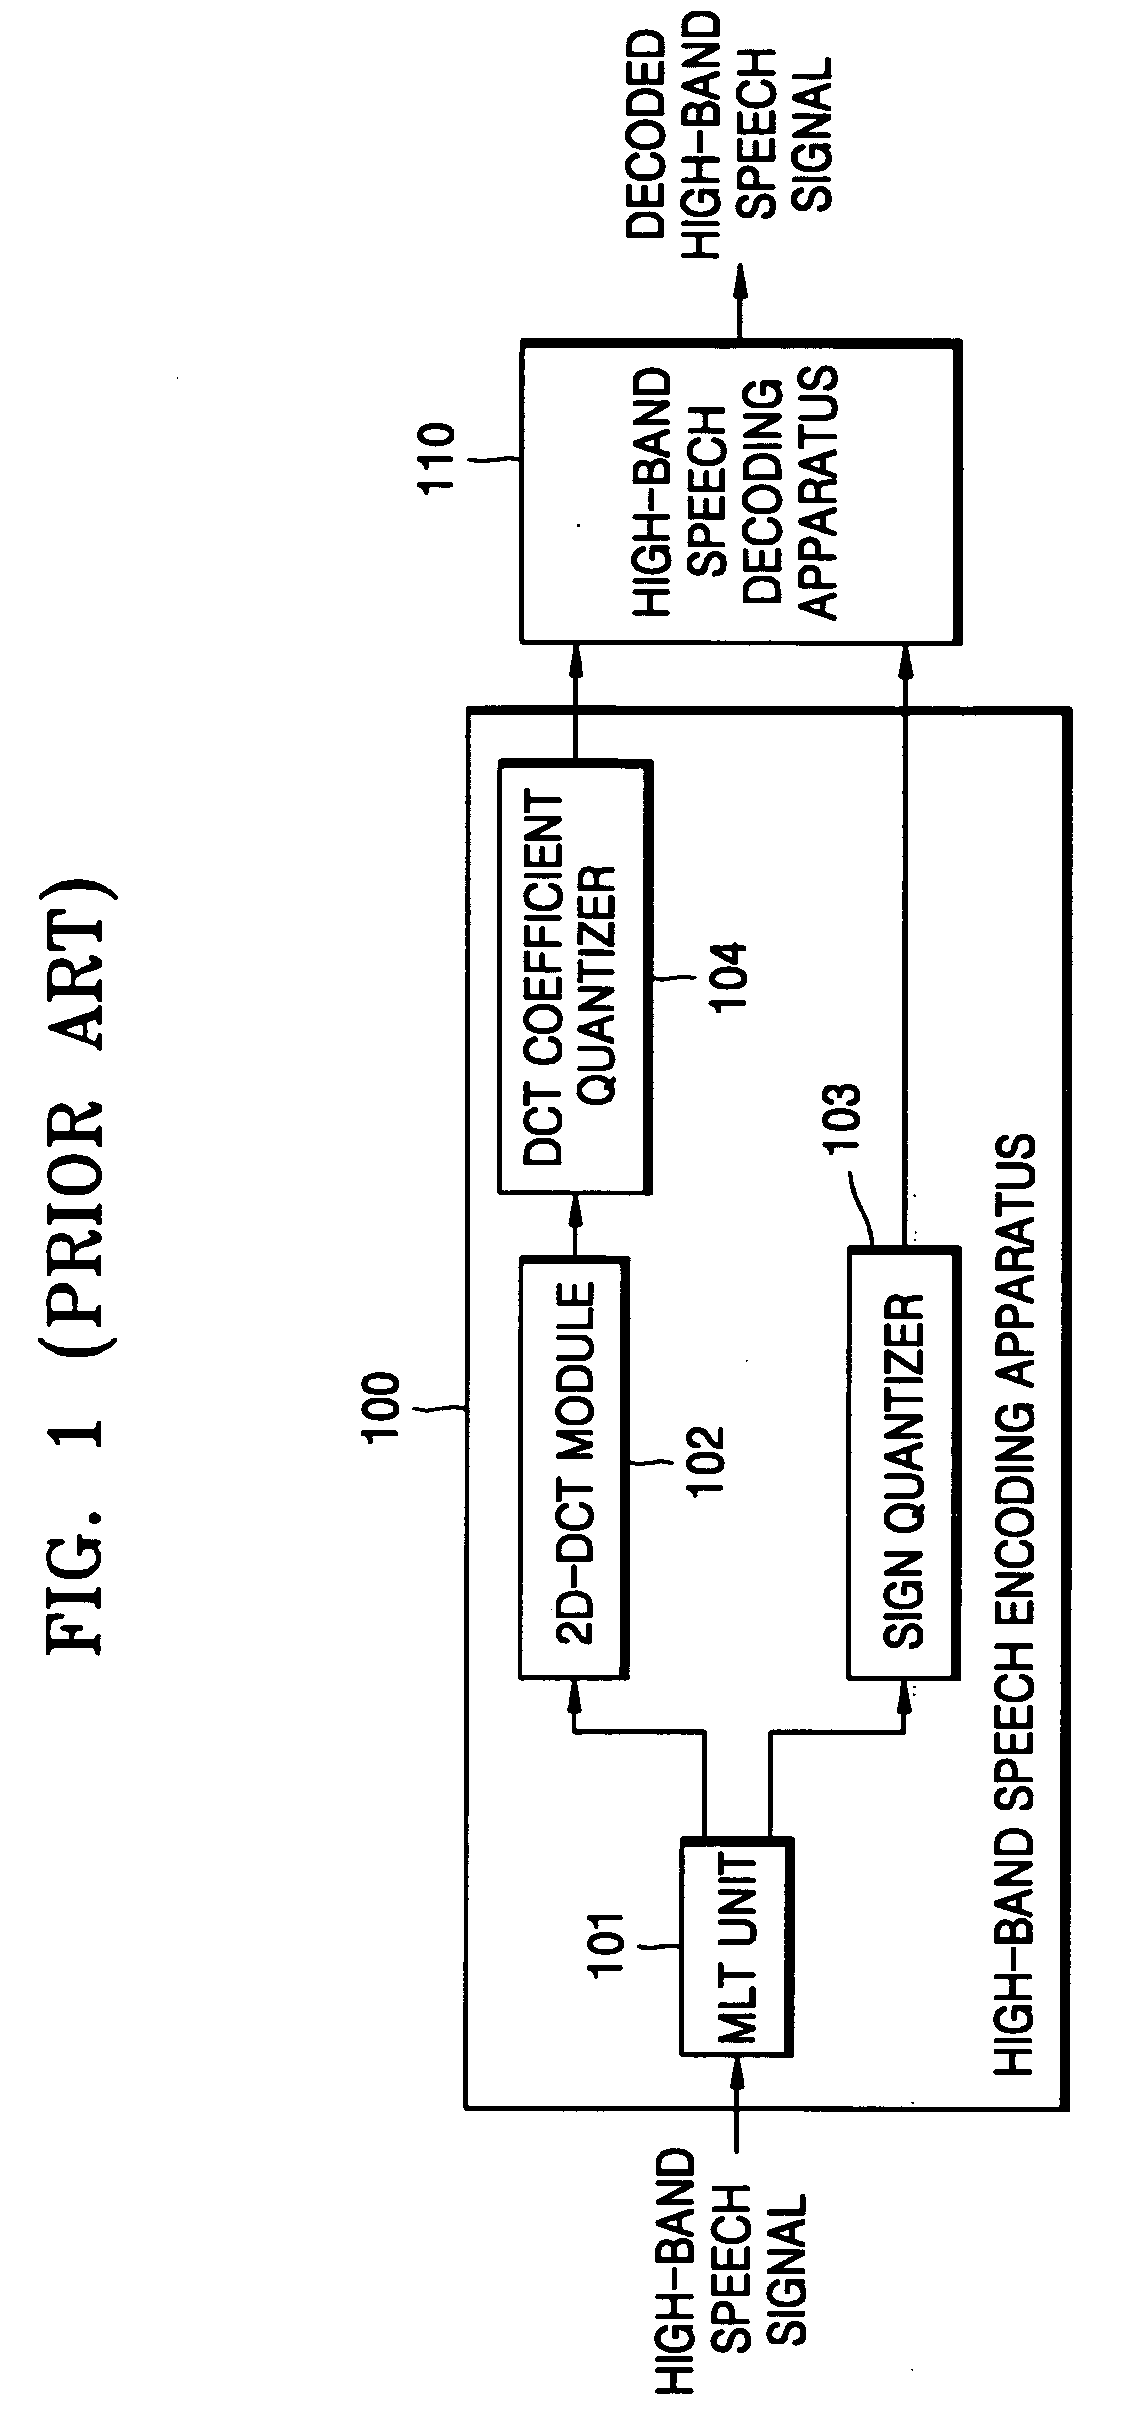 High-band speech coding apparatus and high-band speech decoding apparatus in wide-band speech coding/decoding system and high-band speech coding and decoding method performed by the apparatuses